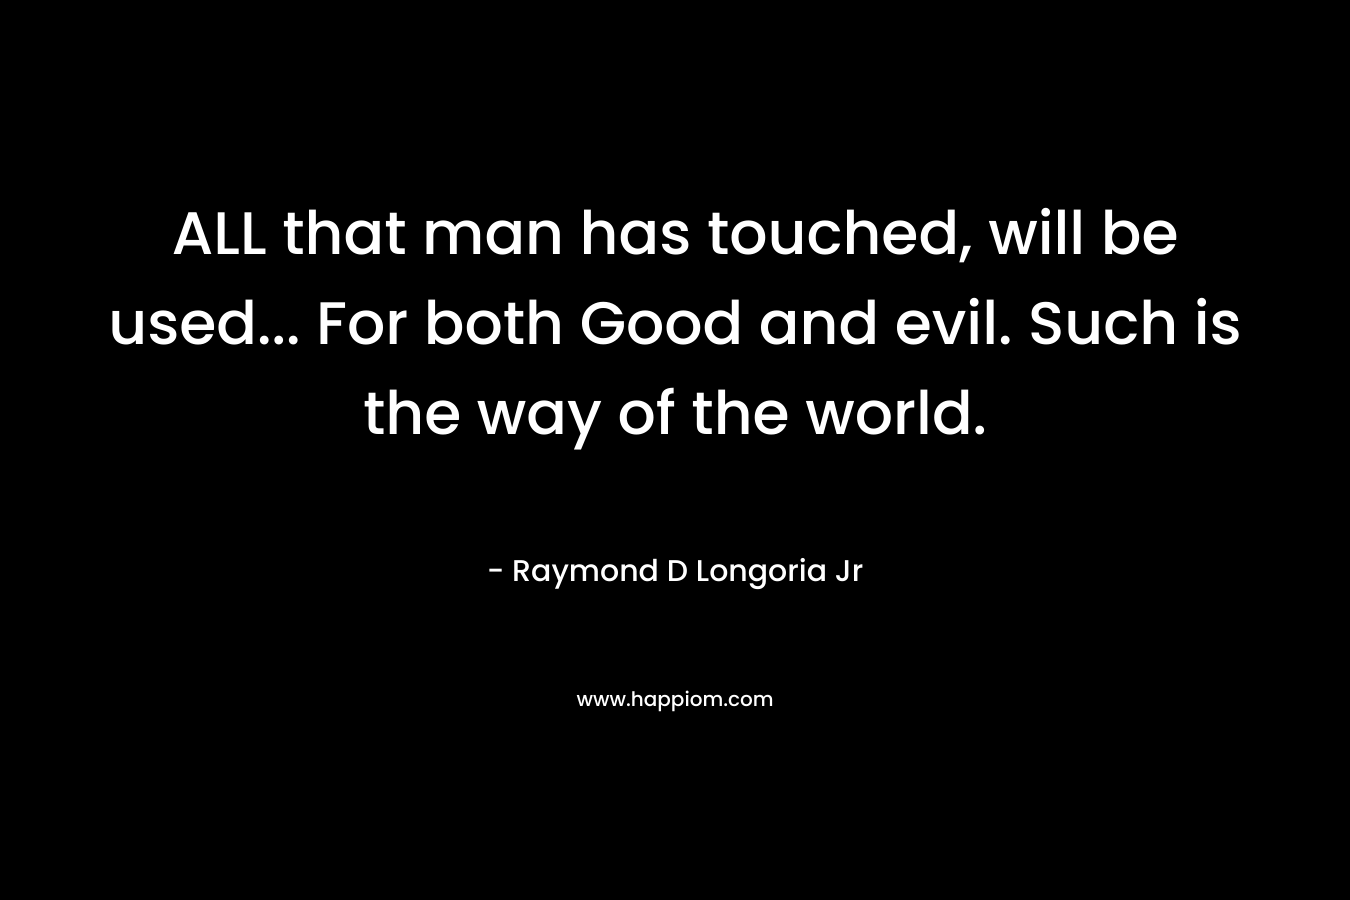 ALL that man has touched, will be used… For both Good and evil. Such is the way of the world. – Raymond D Longoria Jr